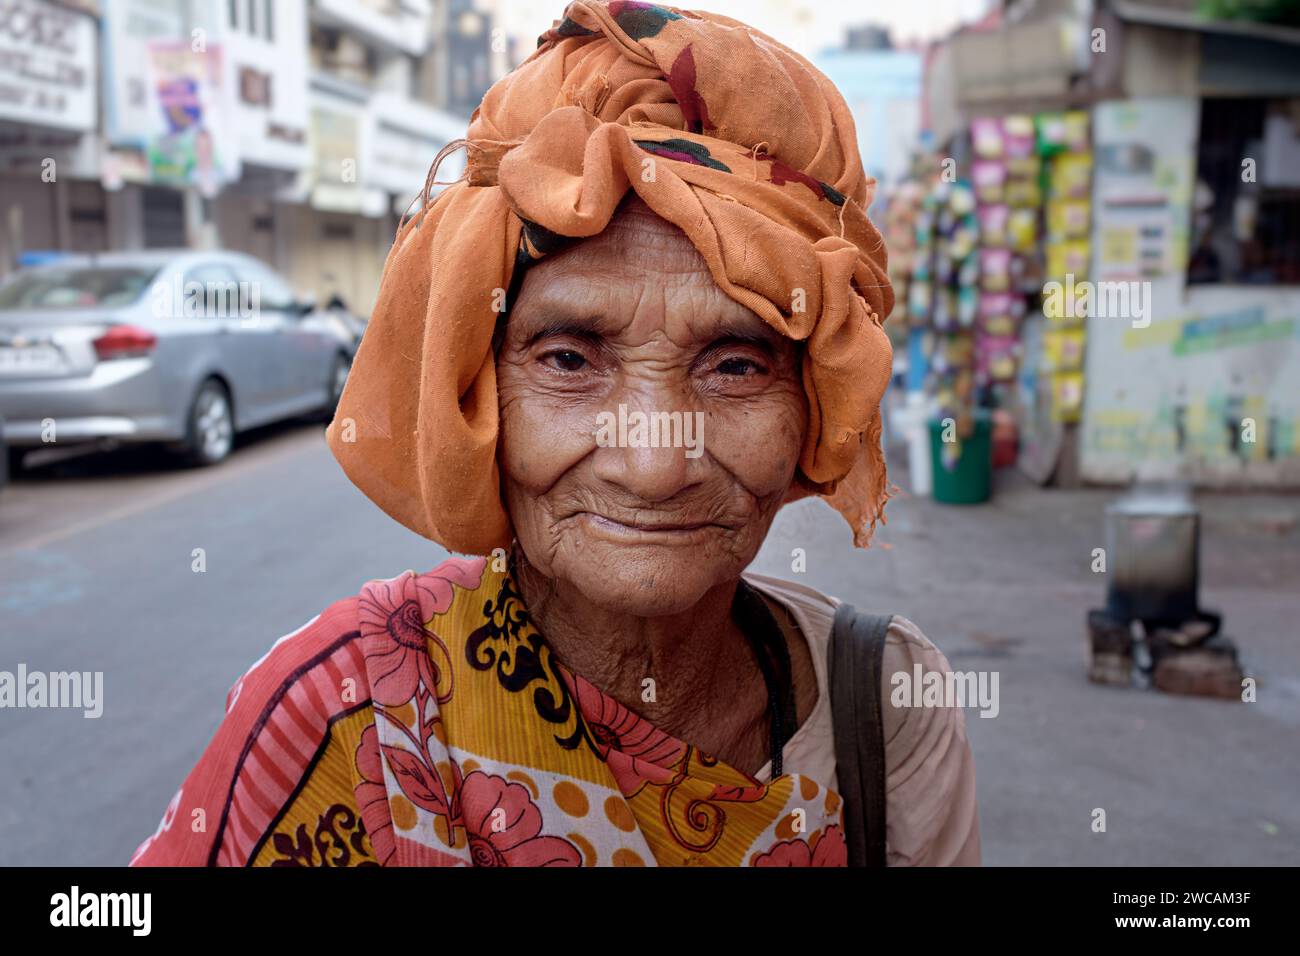 An old, homeless woman outside Mumbadevi Temple, Mumbai, India, her orange or saffron-colored head dress indicating Hindu faith, surviving by begging Stock Photo